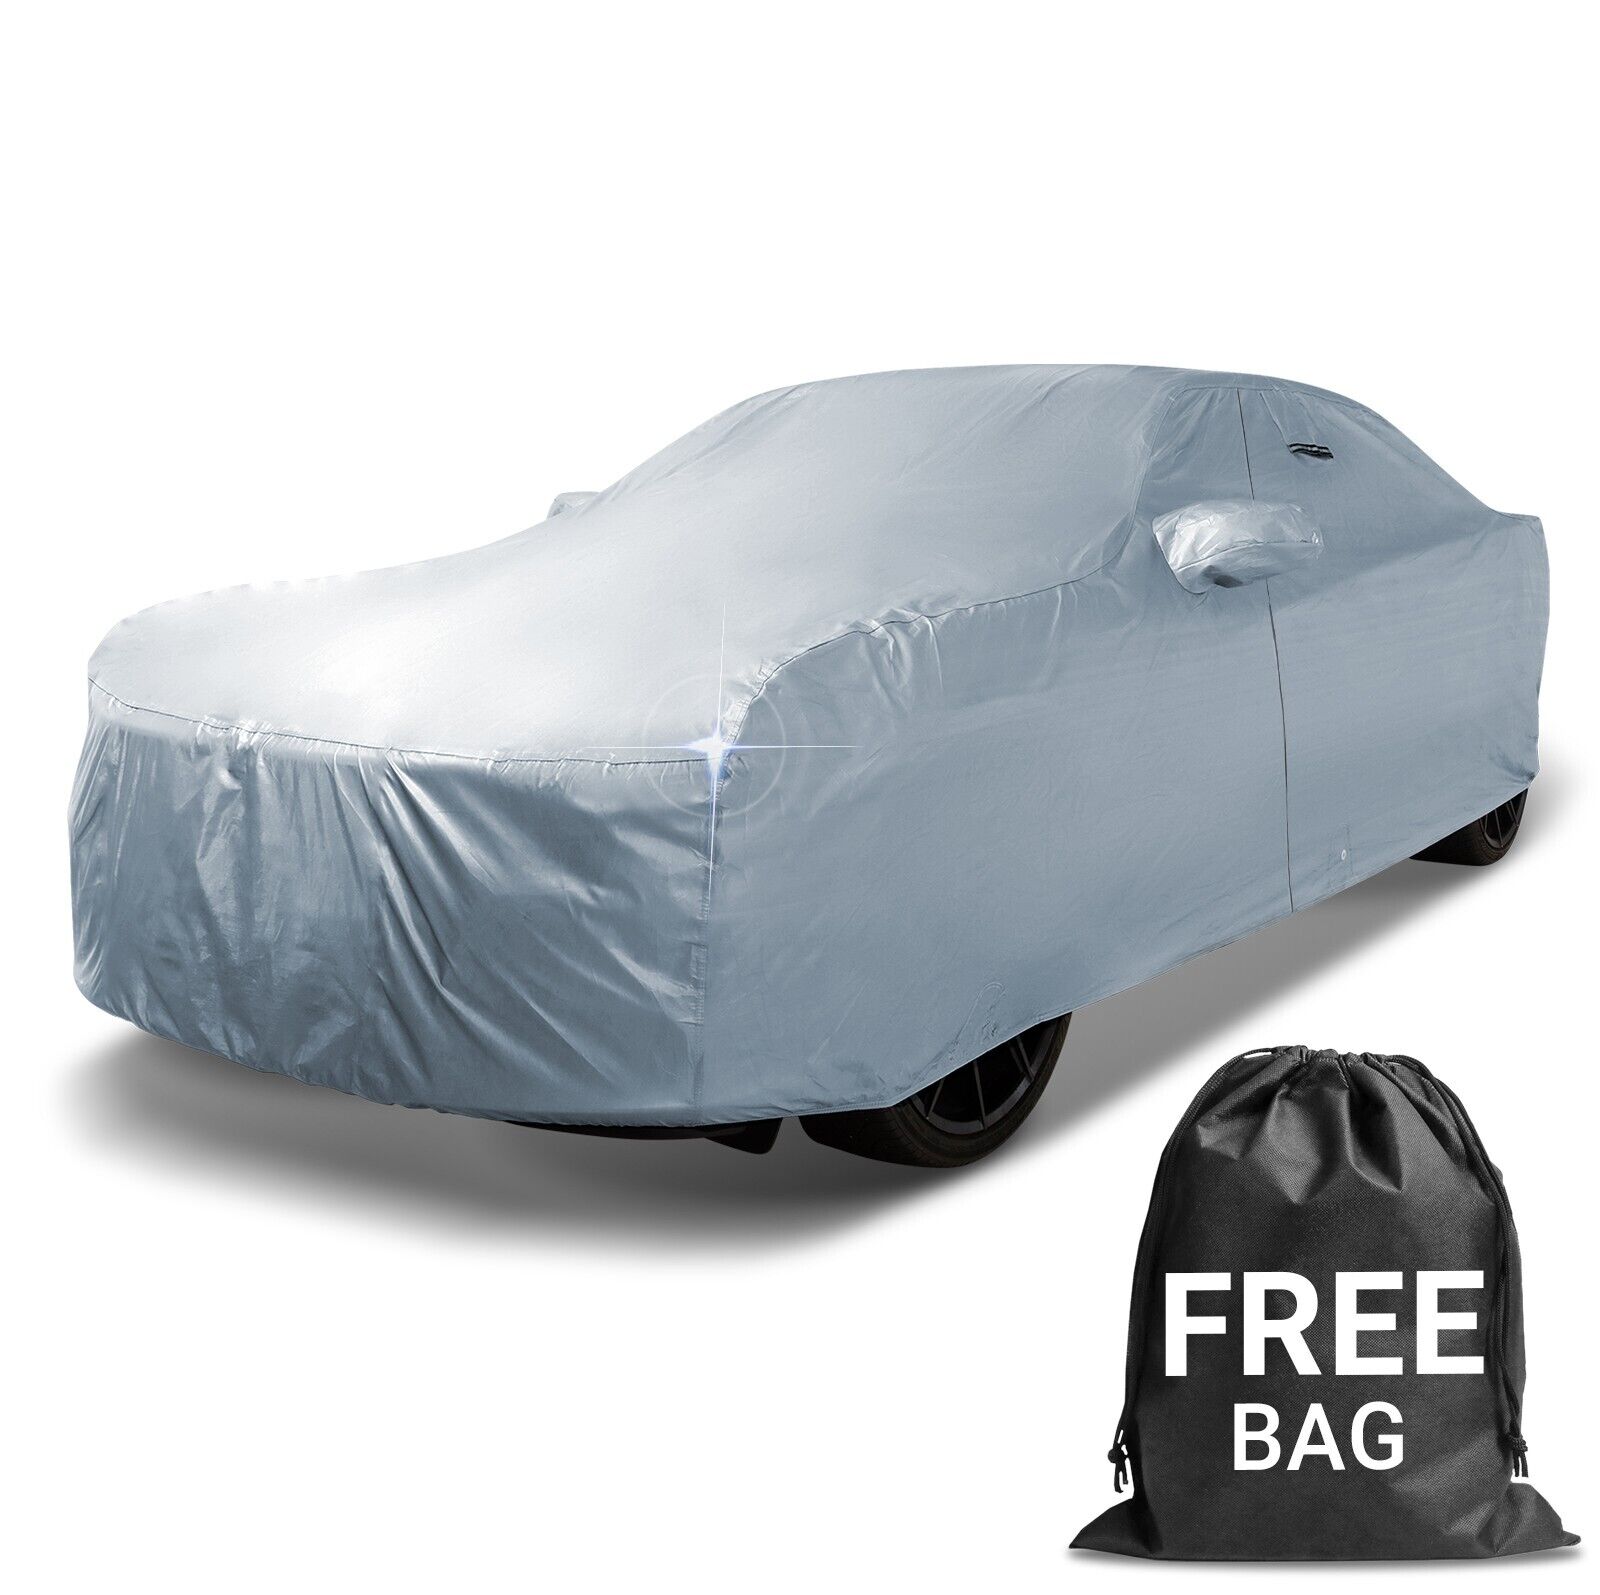 1983-1988 Mercury Cougar Custom Car Cover - All-Weather Waterproof Protection